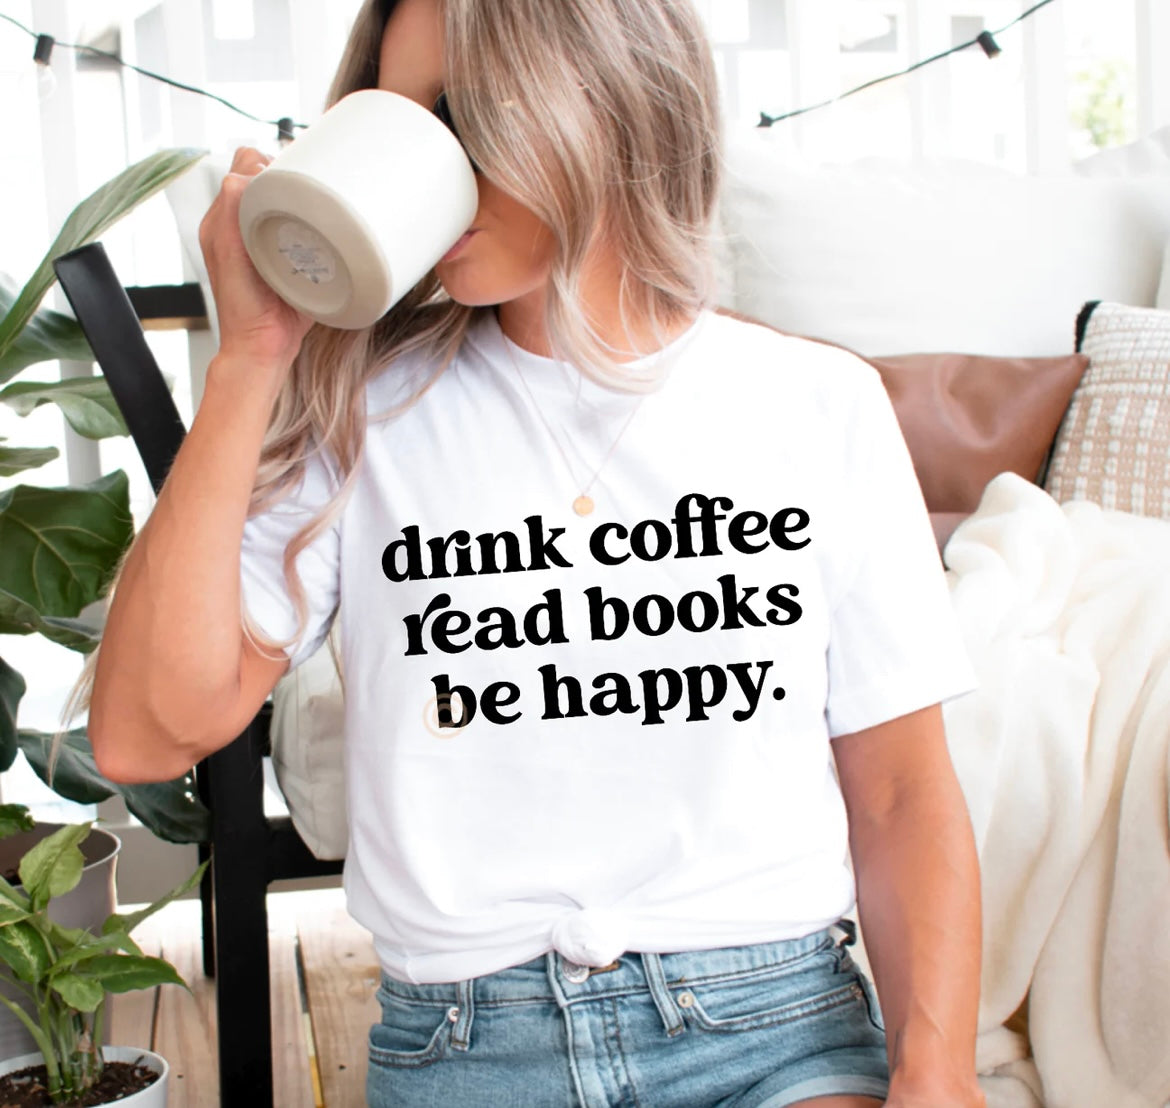 Drink coffee, read books, be happy